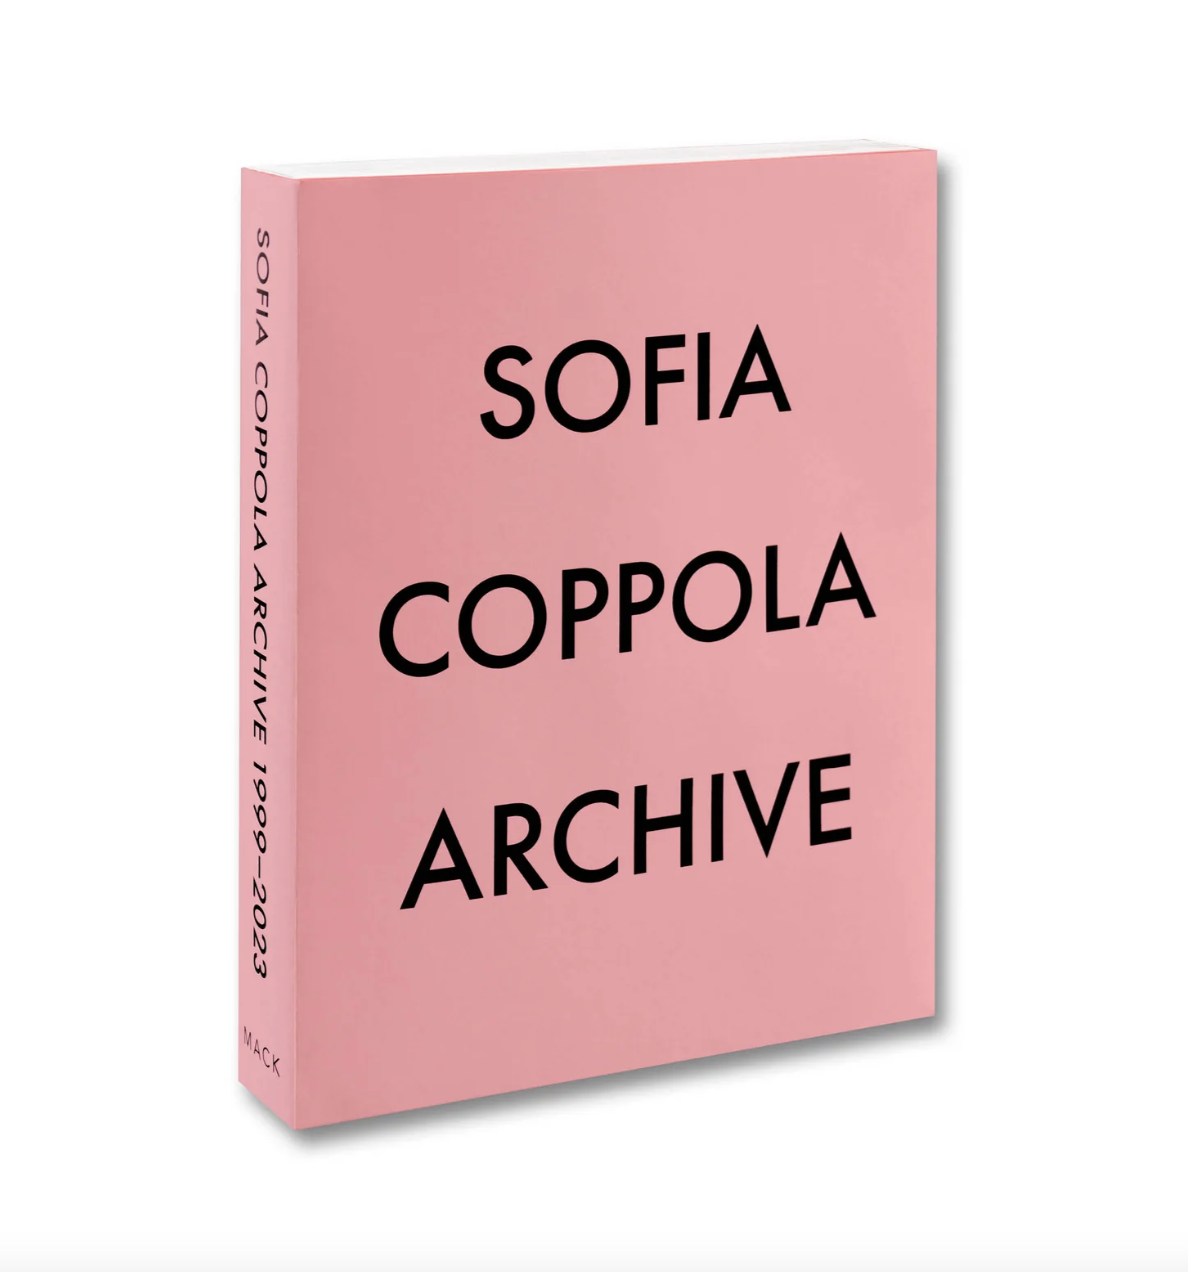 The Wick - Sofia Coppola's new book gives a glimpse behind the scenes of her cult films